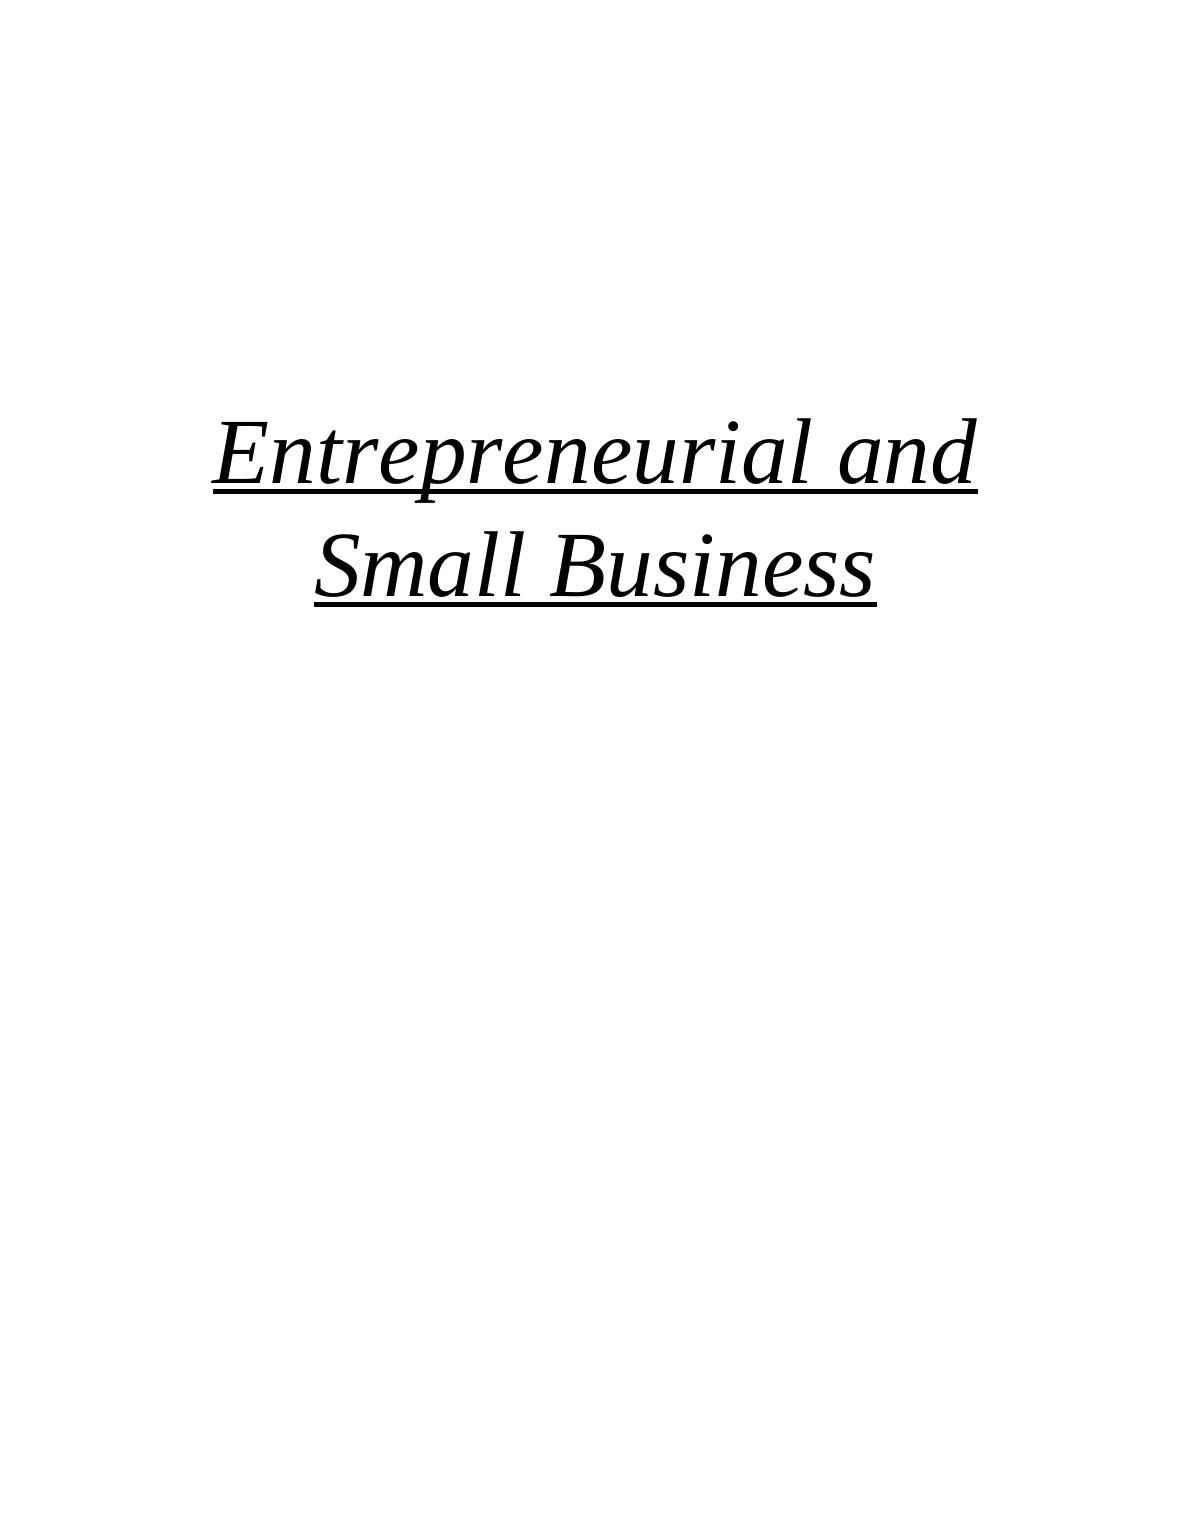 Entrepreneurial and Small Business - UK_1